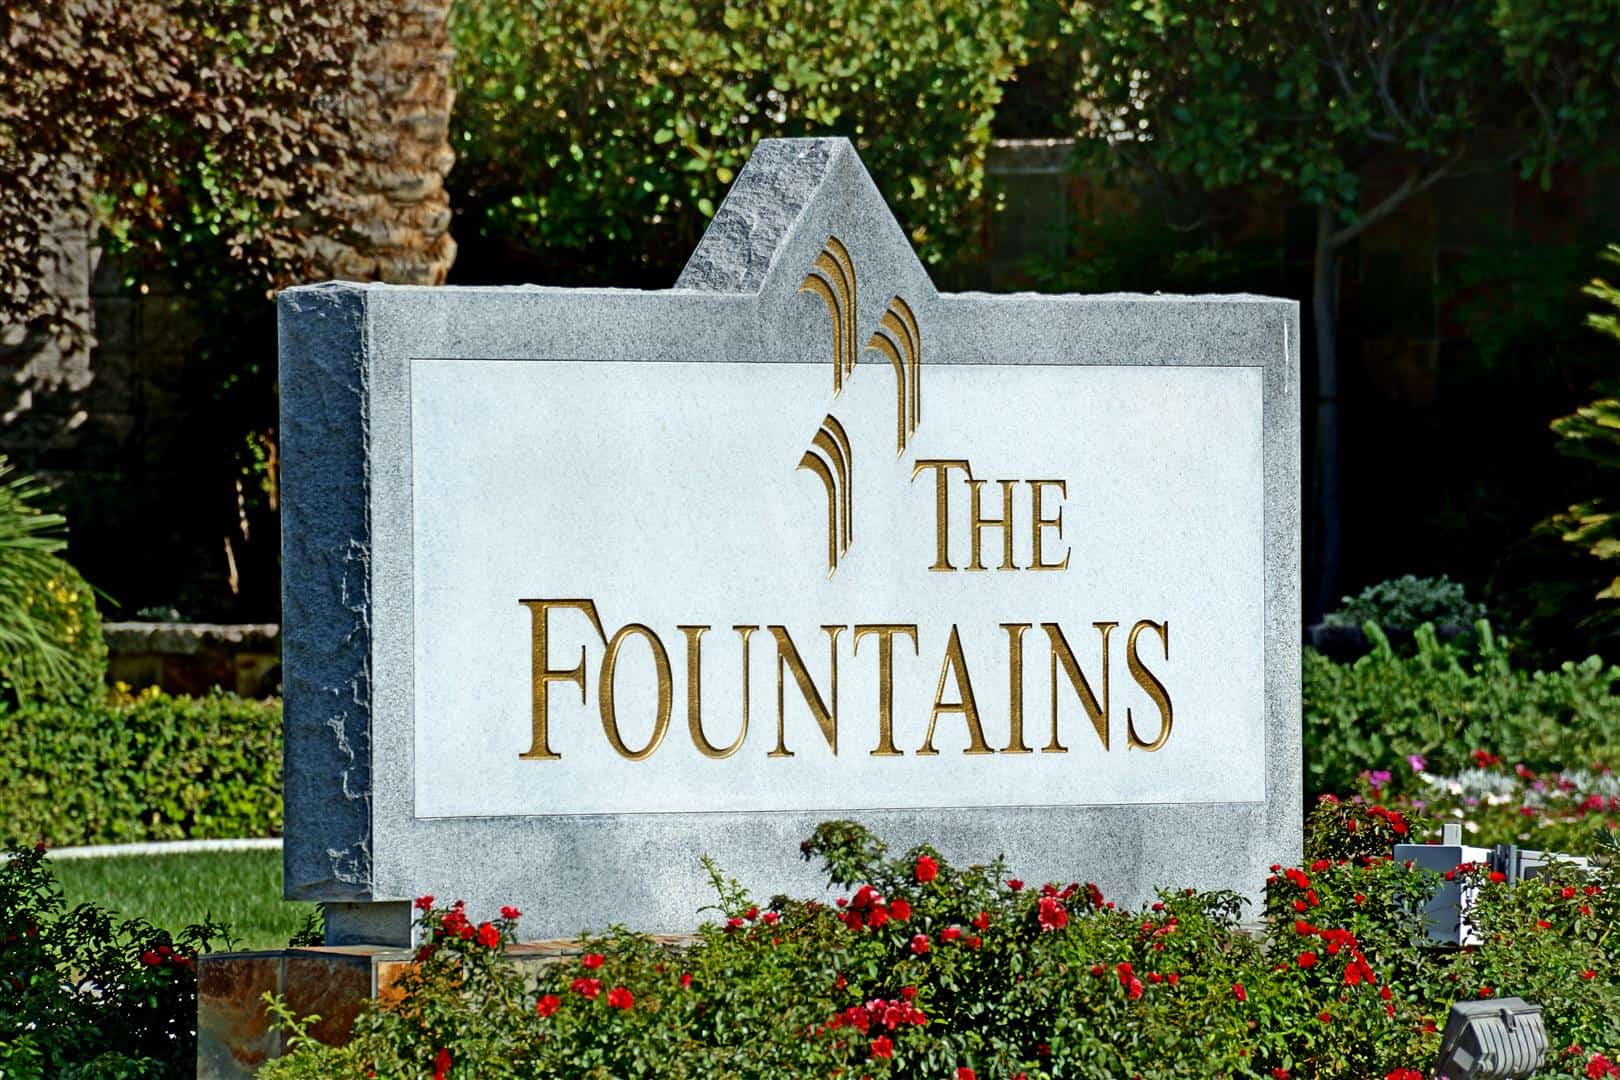 the-fountains-rob-jensen-company-guard-gated-real-estate-summerlin-las-vegas-henderson-2